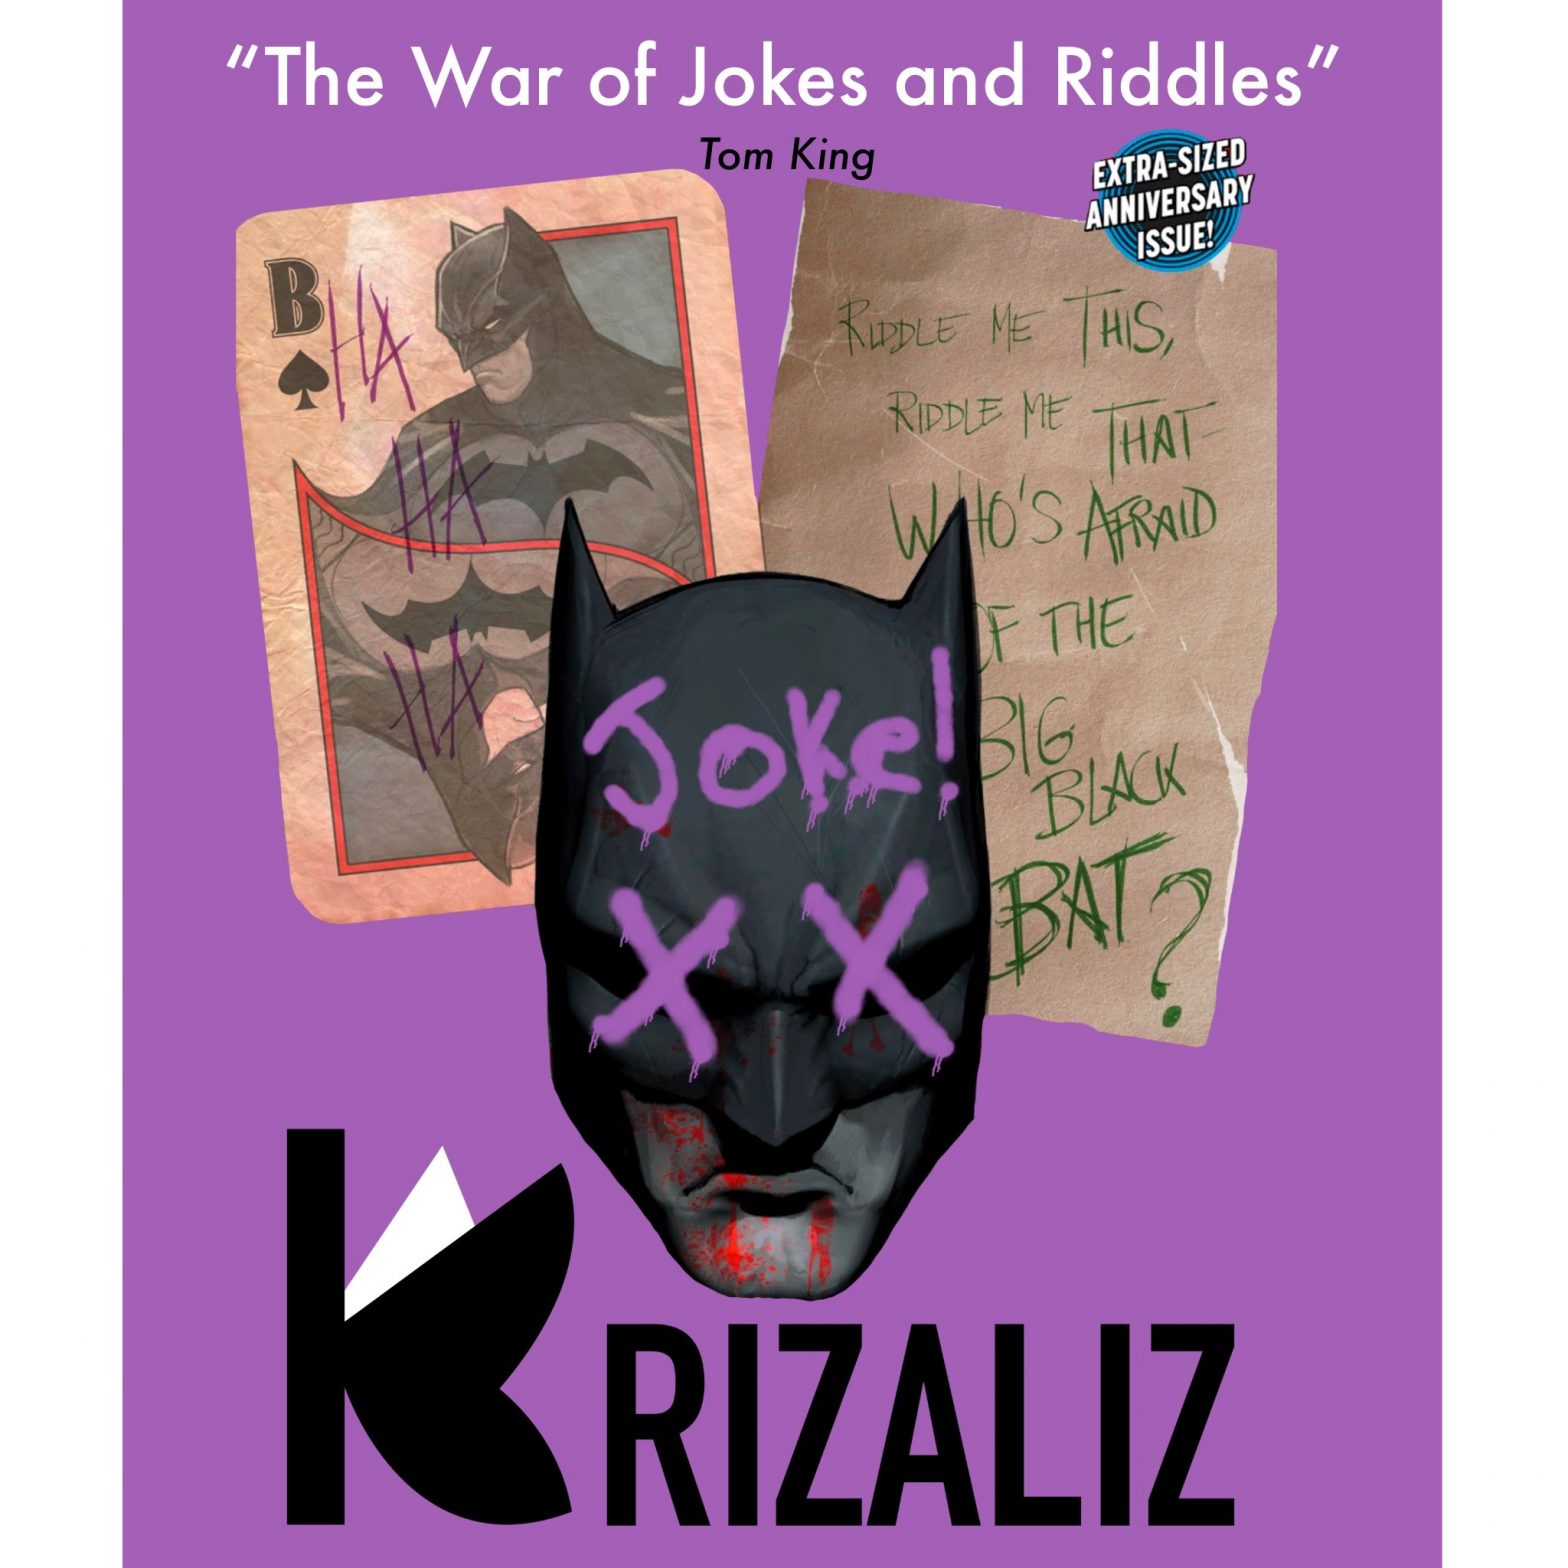 Cover for the essay "The funny reason why the Batman is joke"